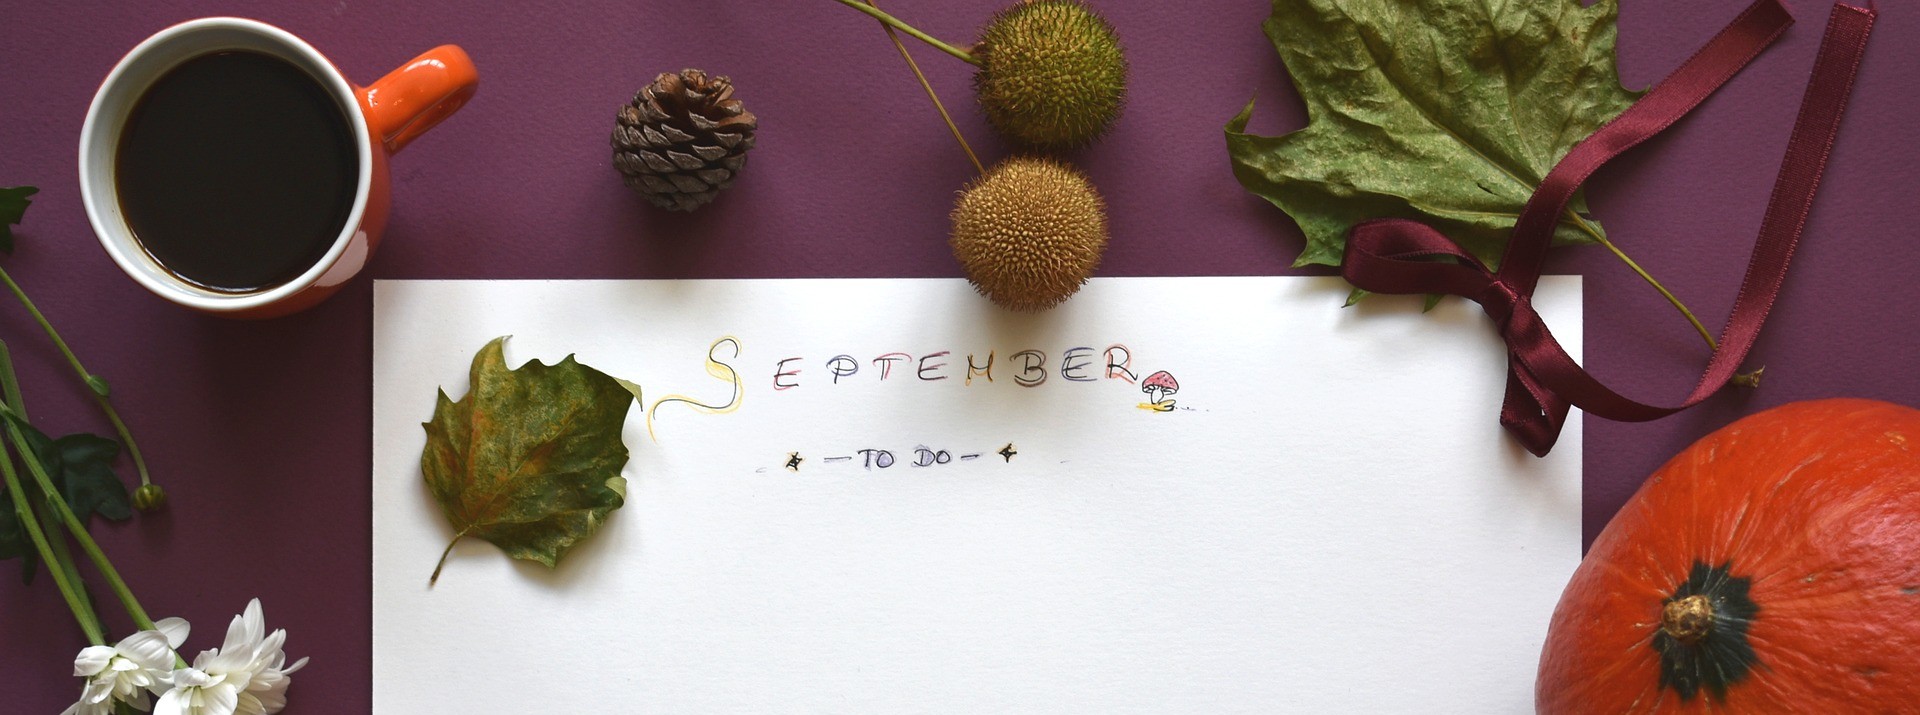 A September to-do list with coffee and fruit